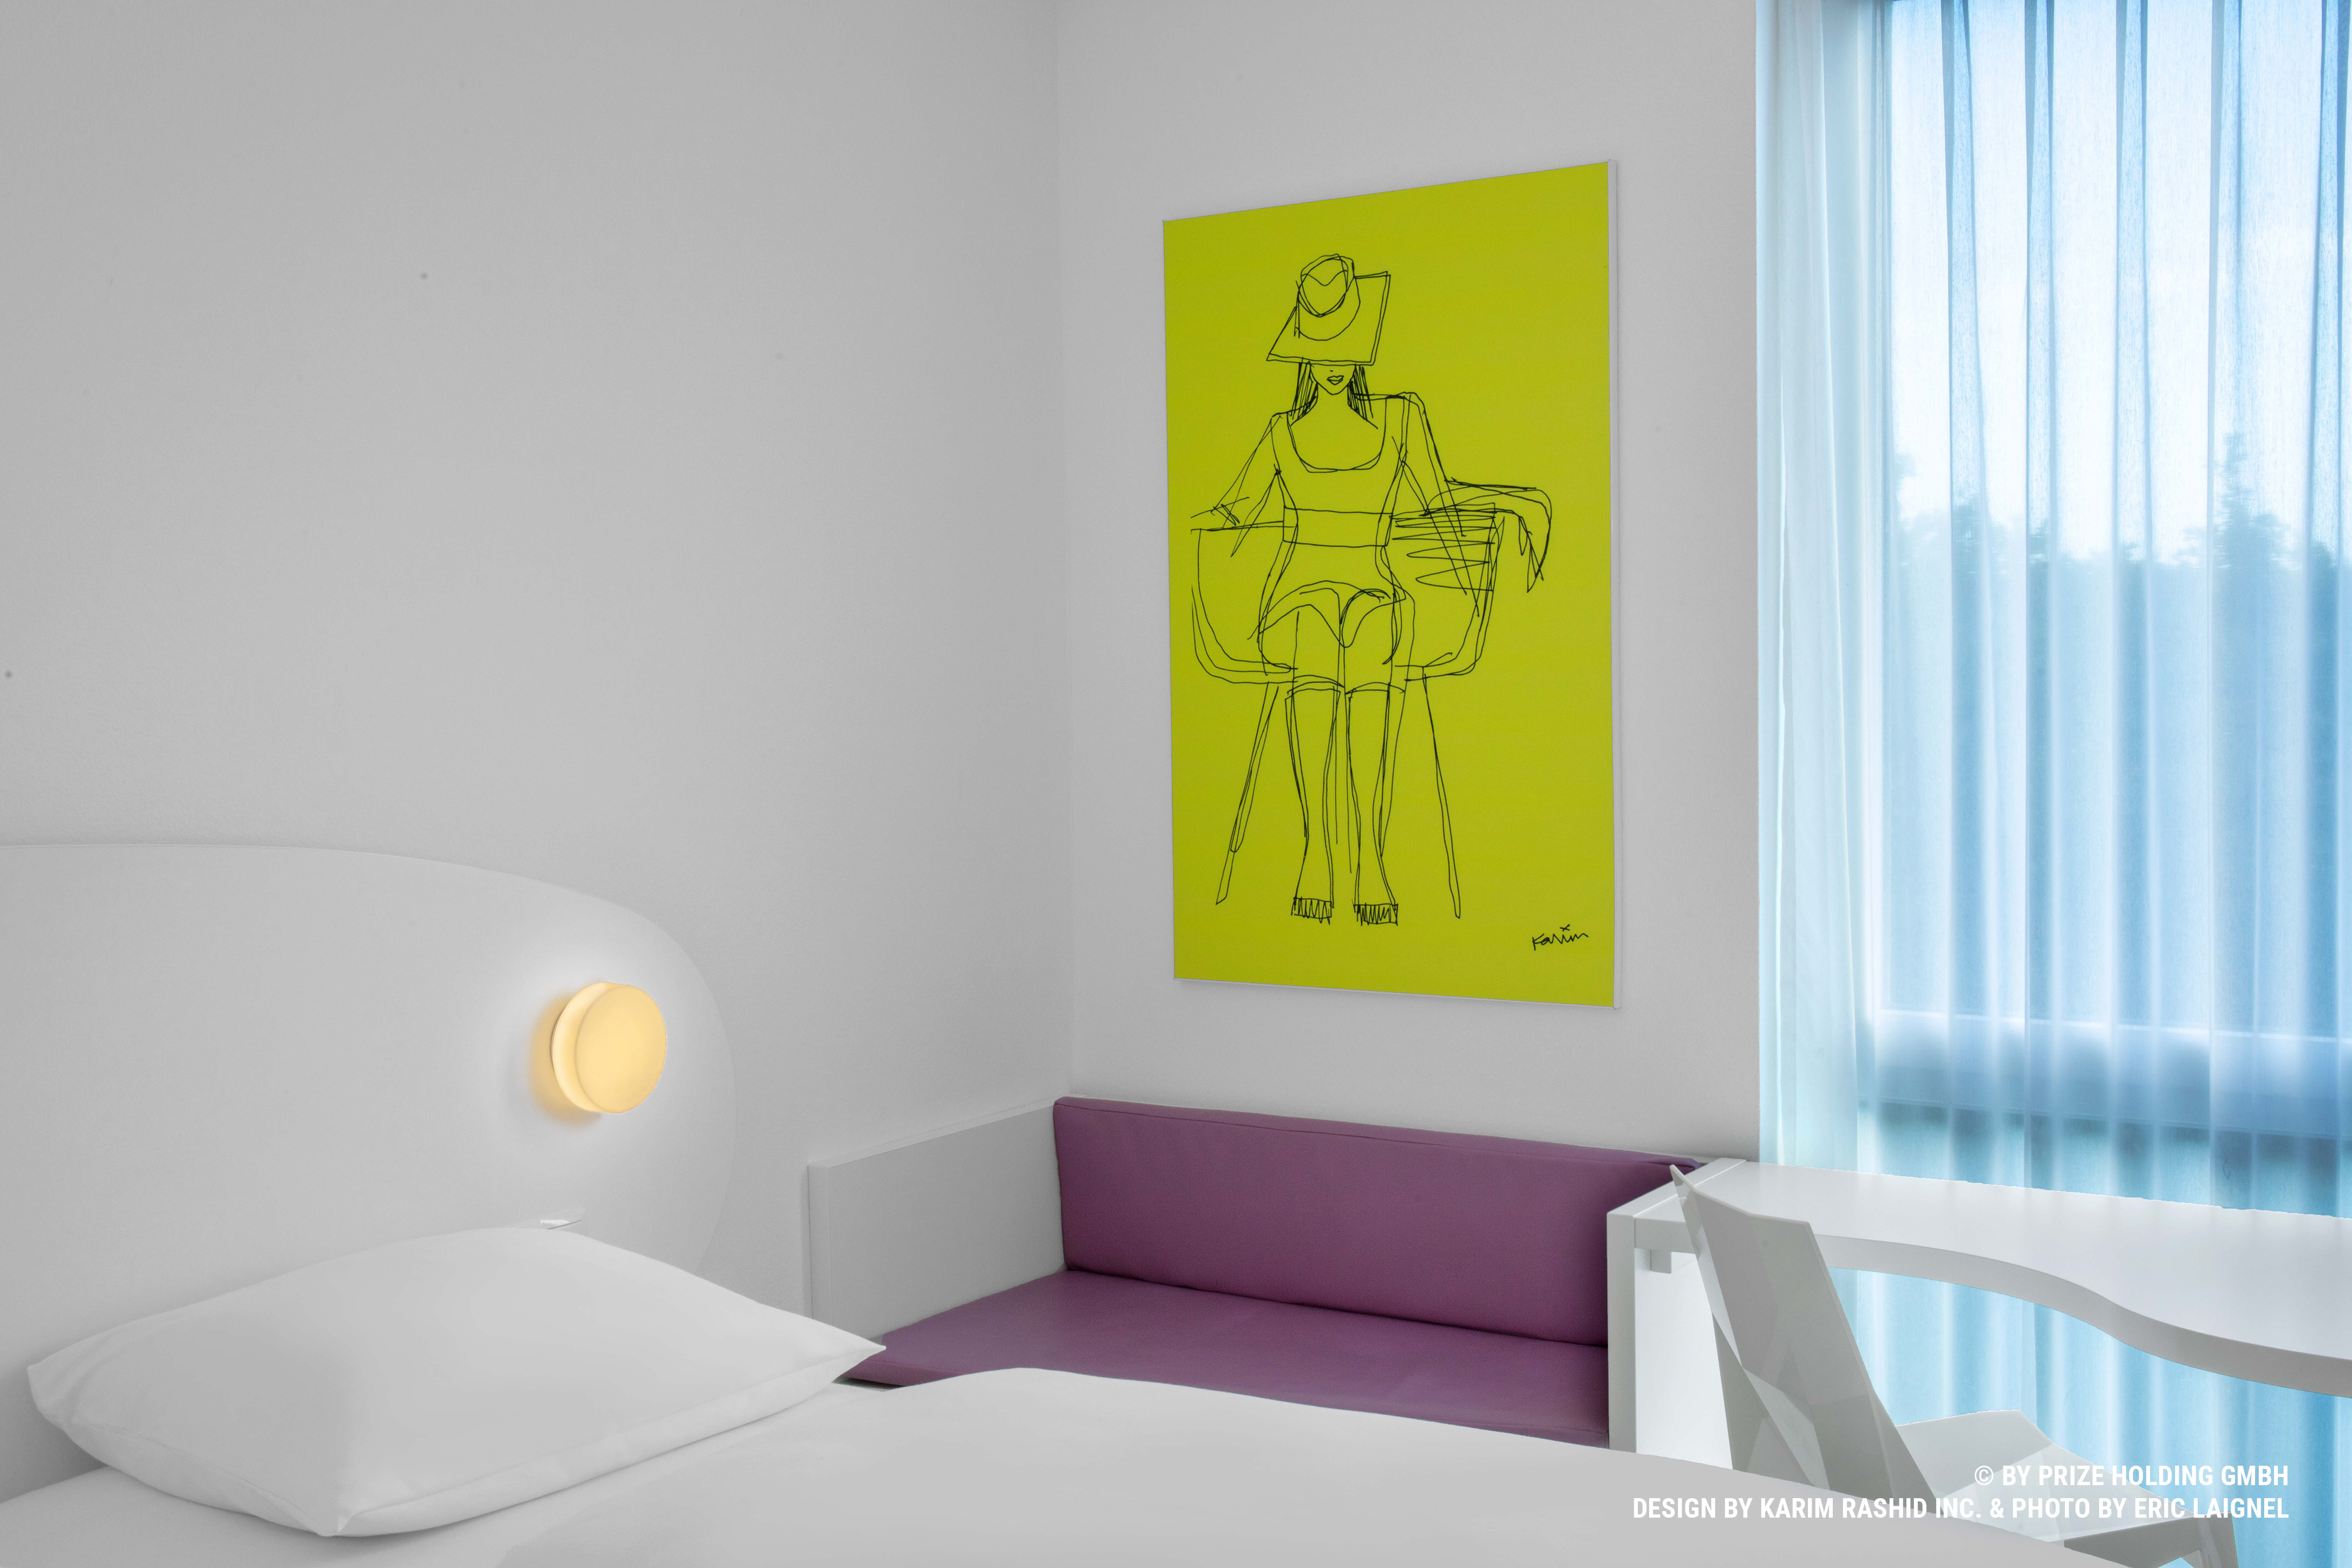 Details of a hotel room in Bremen-City with a yellow sketch on the wall